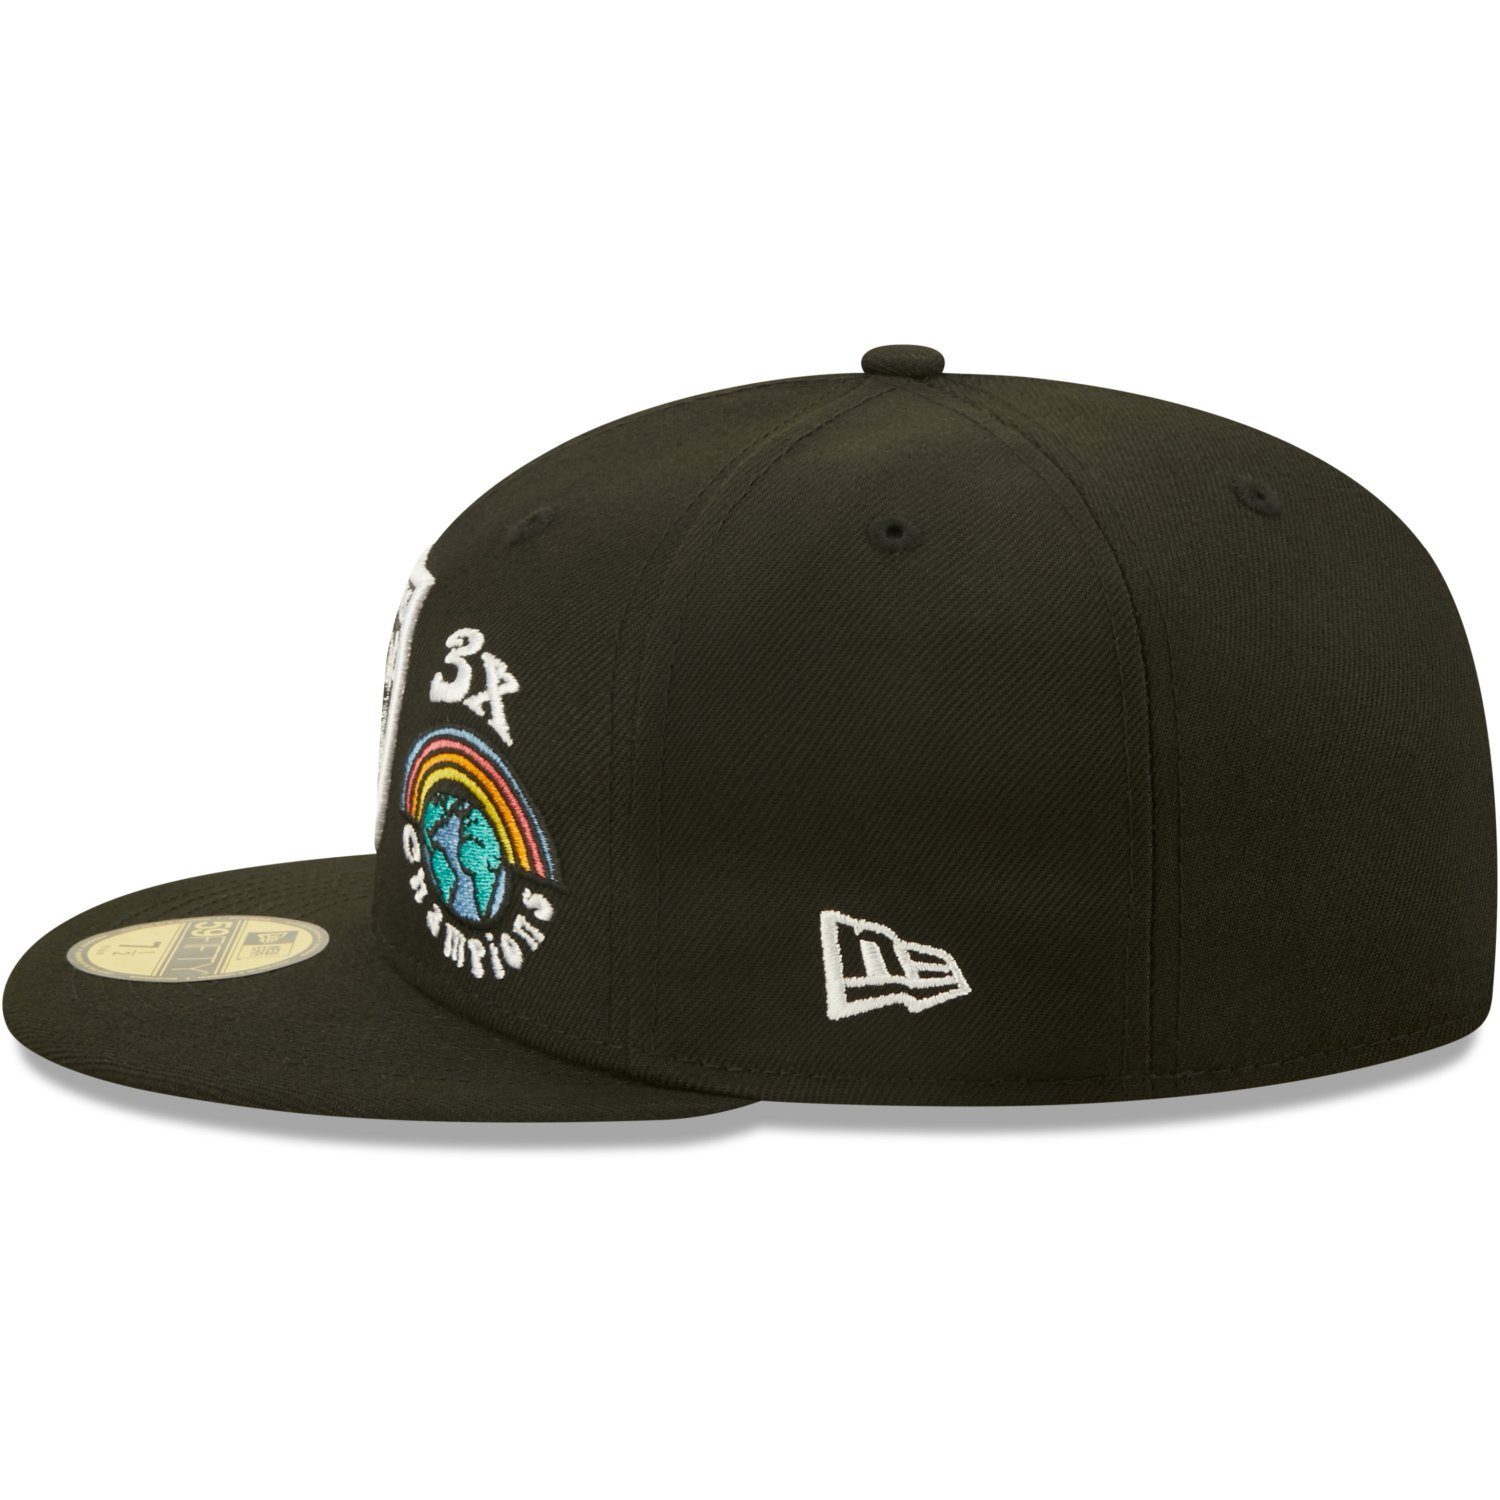 Las New Vegas Cap Era GROOVY Raiders Fitted 59Fifty